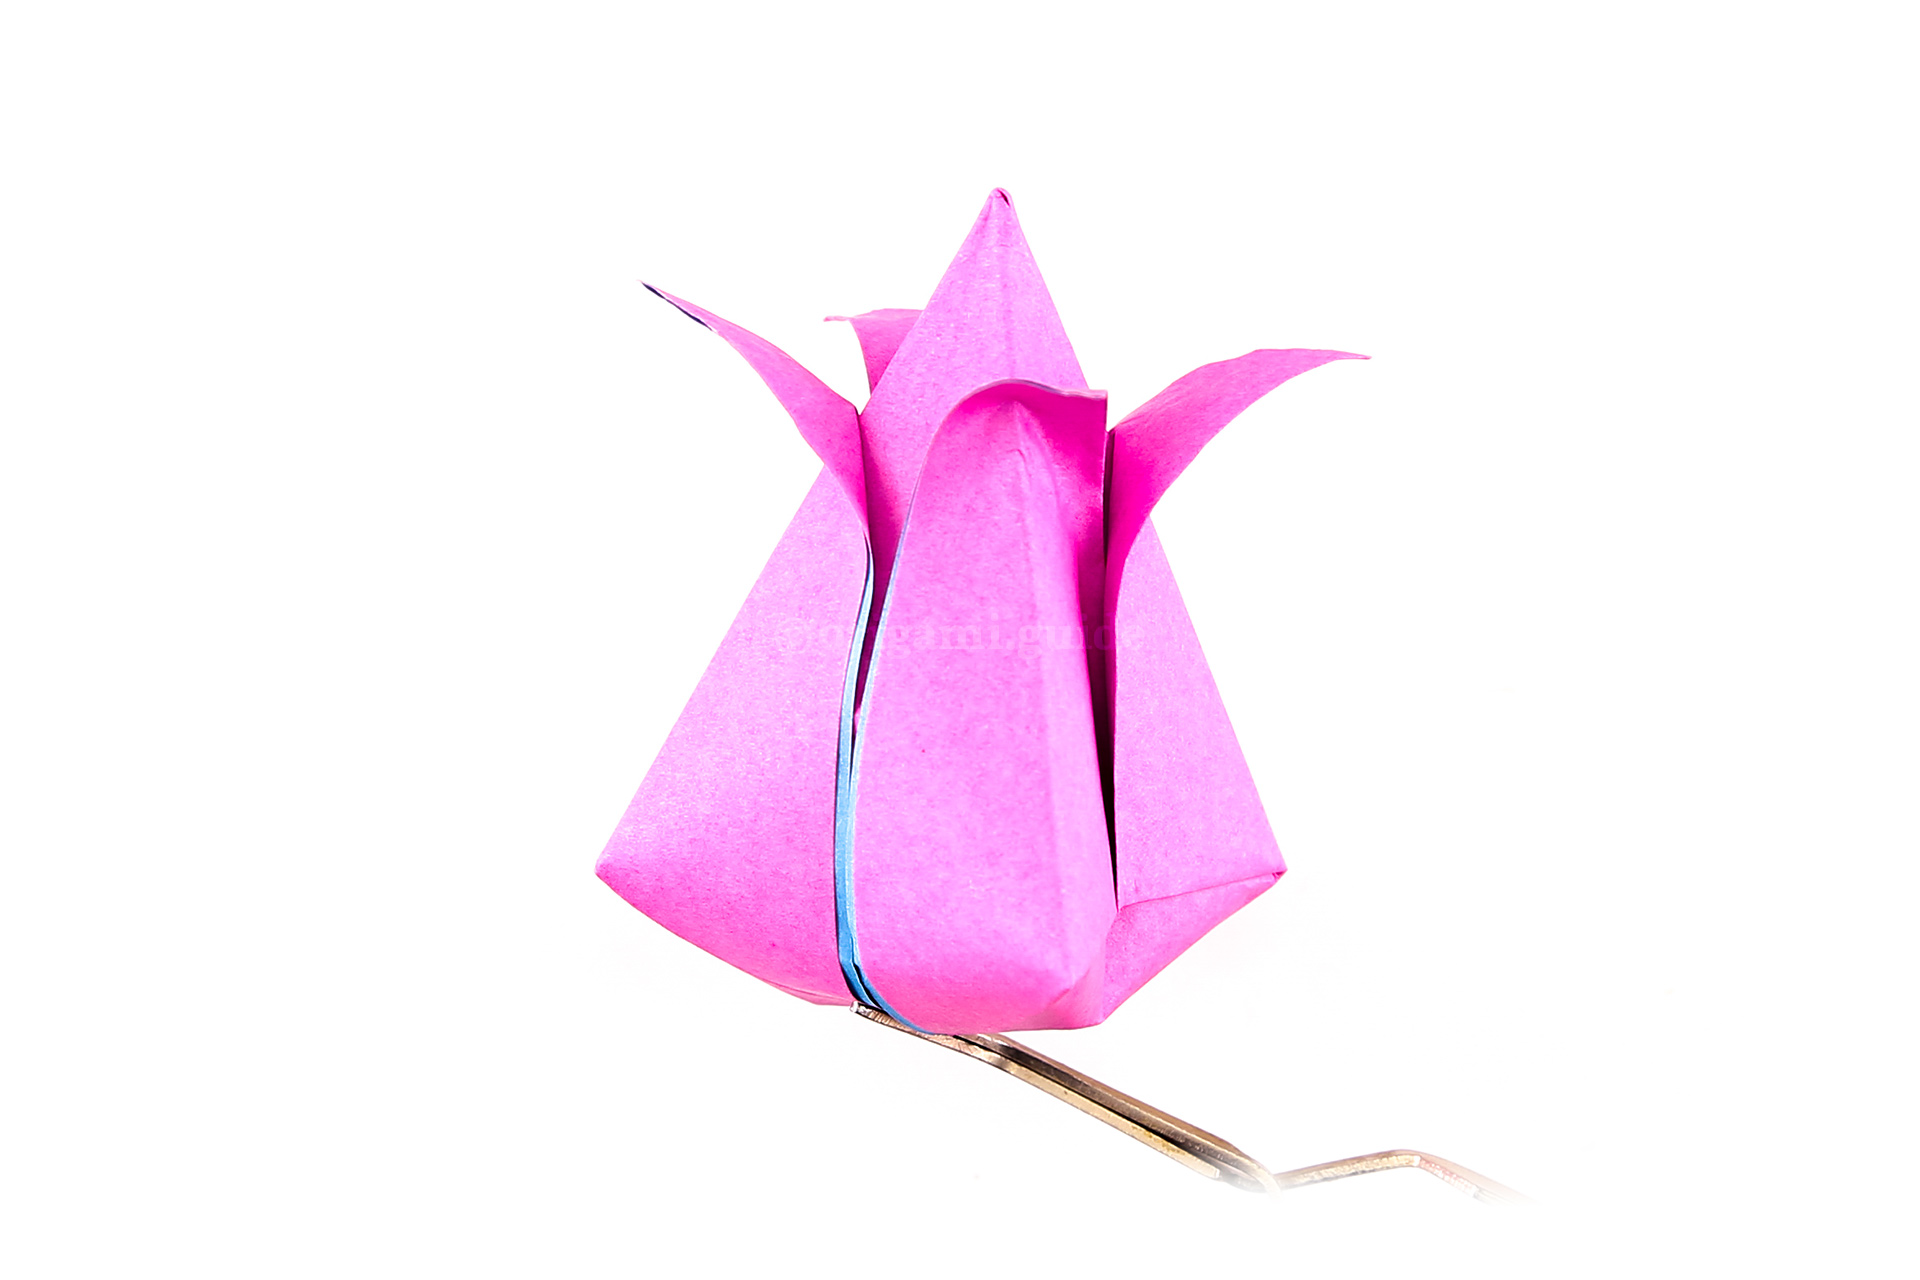 You can now peel the petals down from the top.